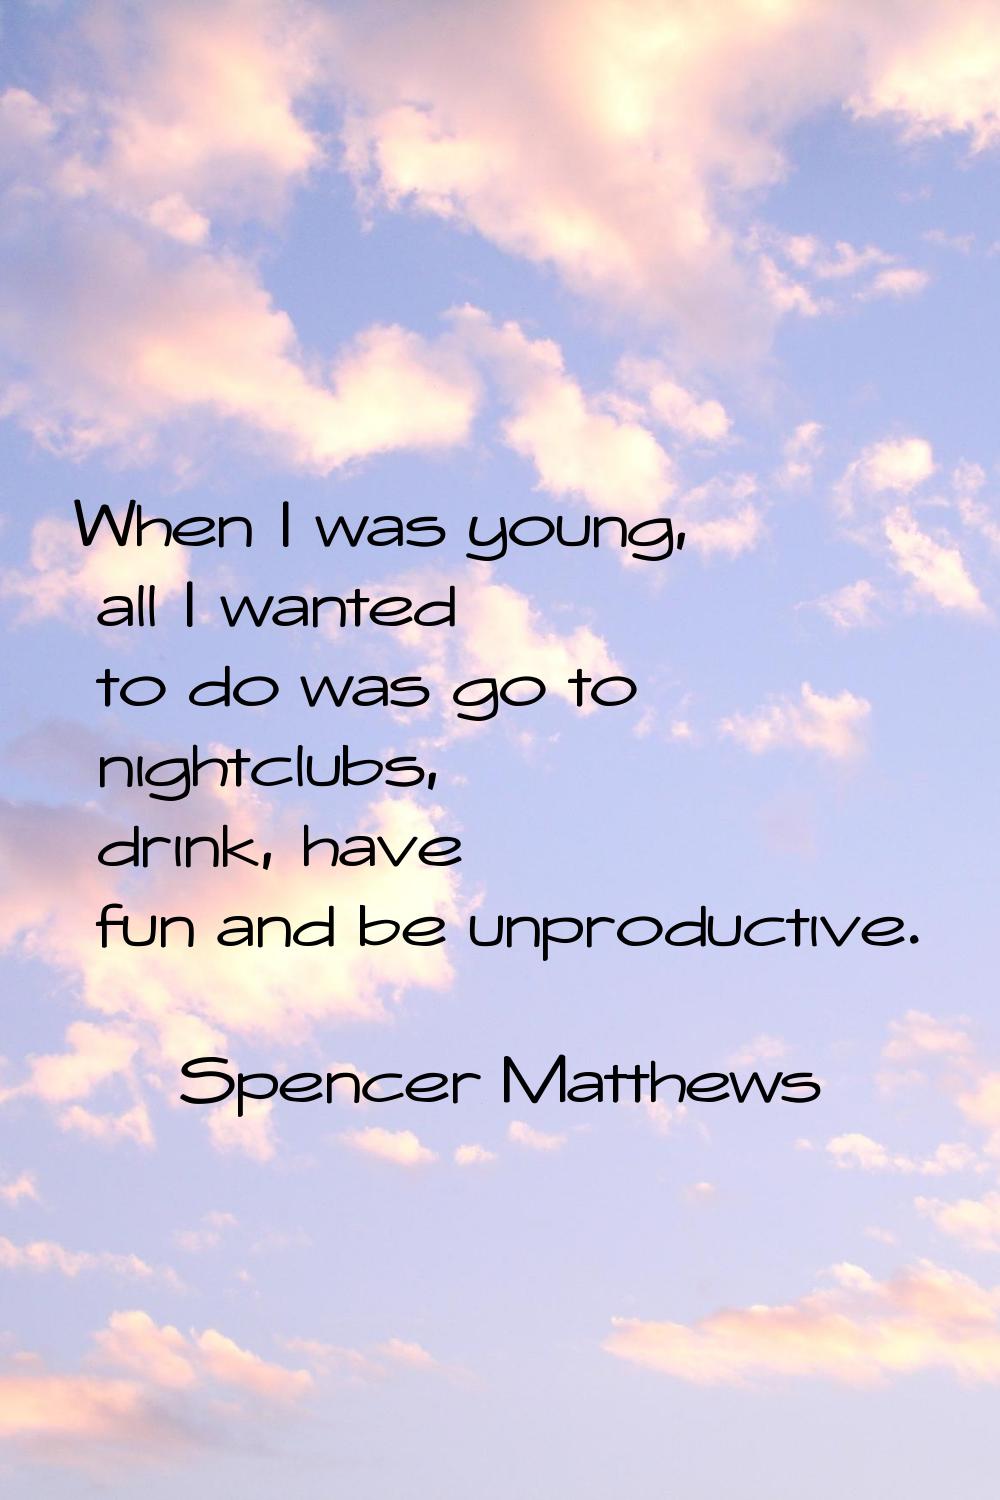 When I was young, all I wanted to do was go to nightclubs, drink, have fun and be unproductive.